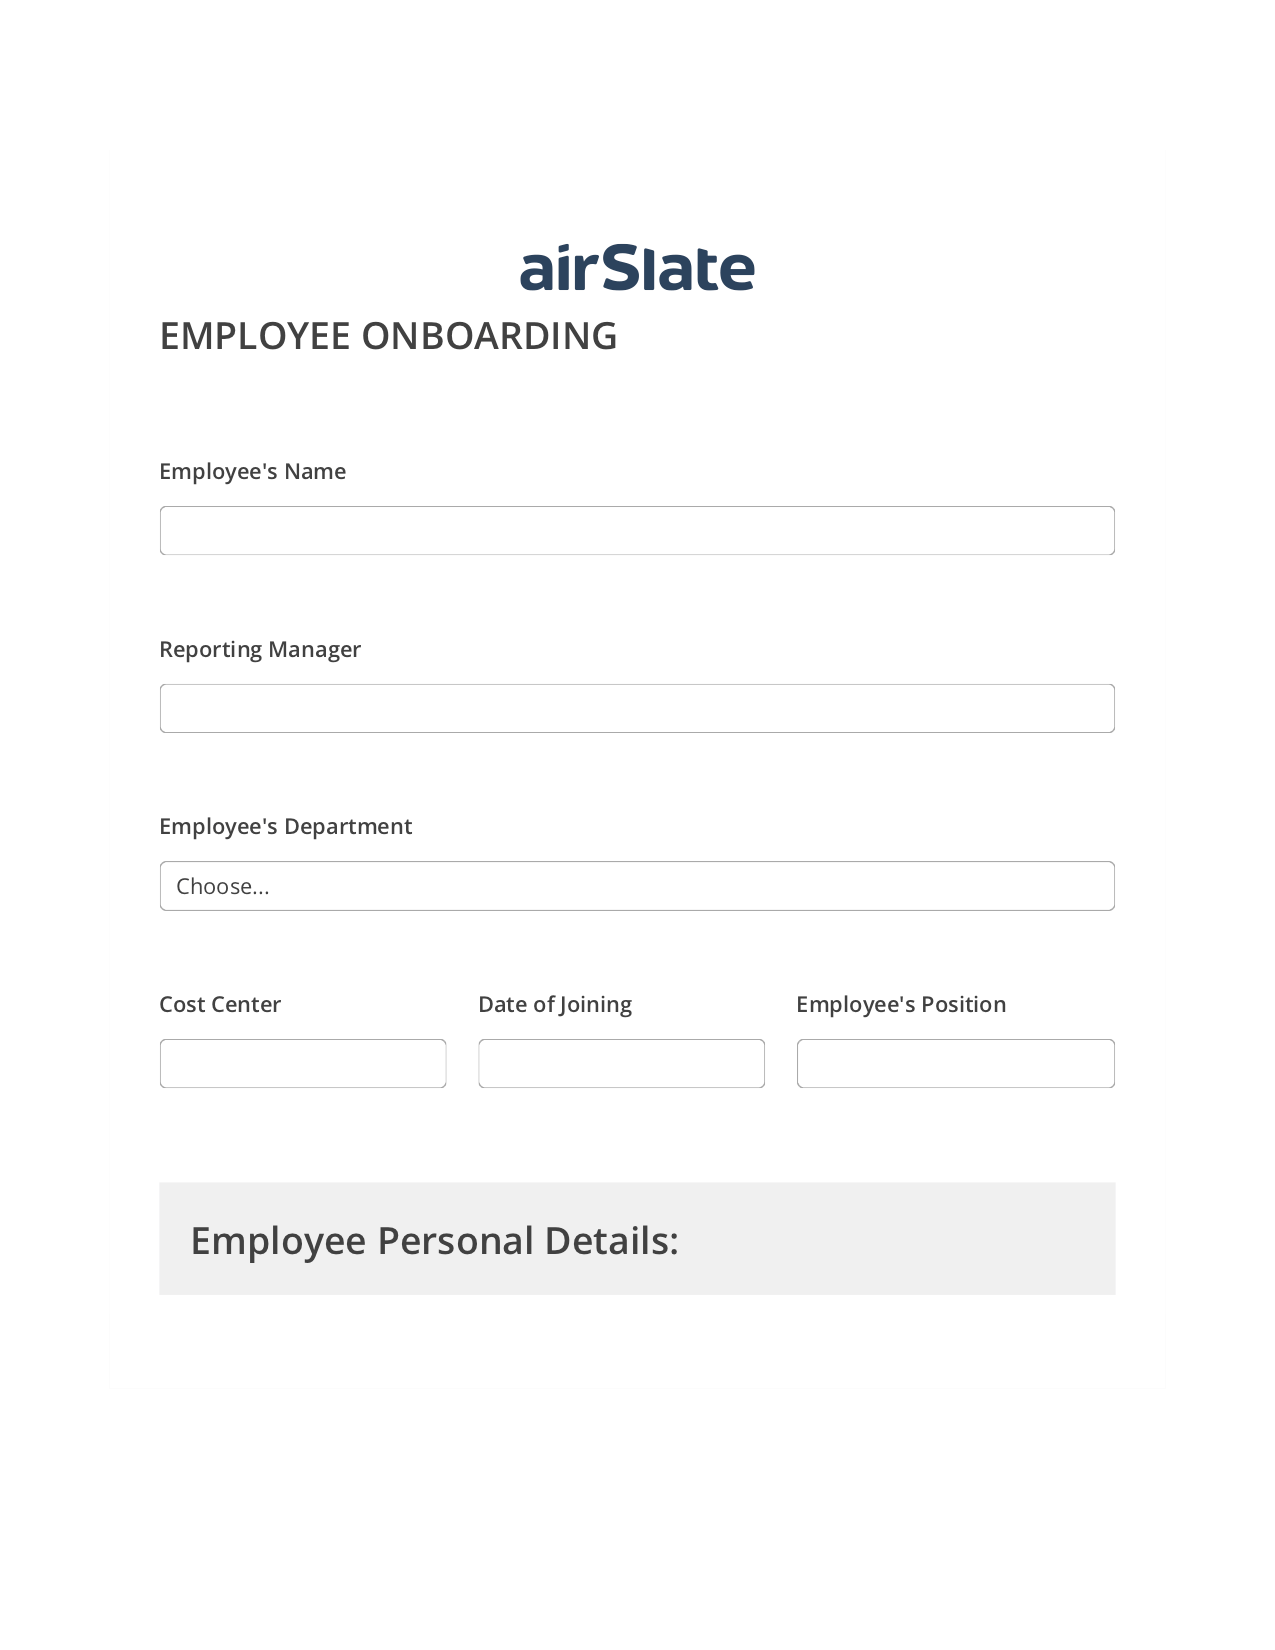 Employee Onboarding Workflow Pre-fill Dropdown from Airtable, Reminder Bot, Post-finish Document Bot